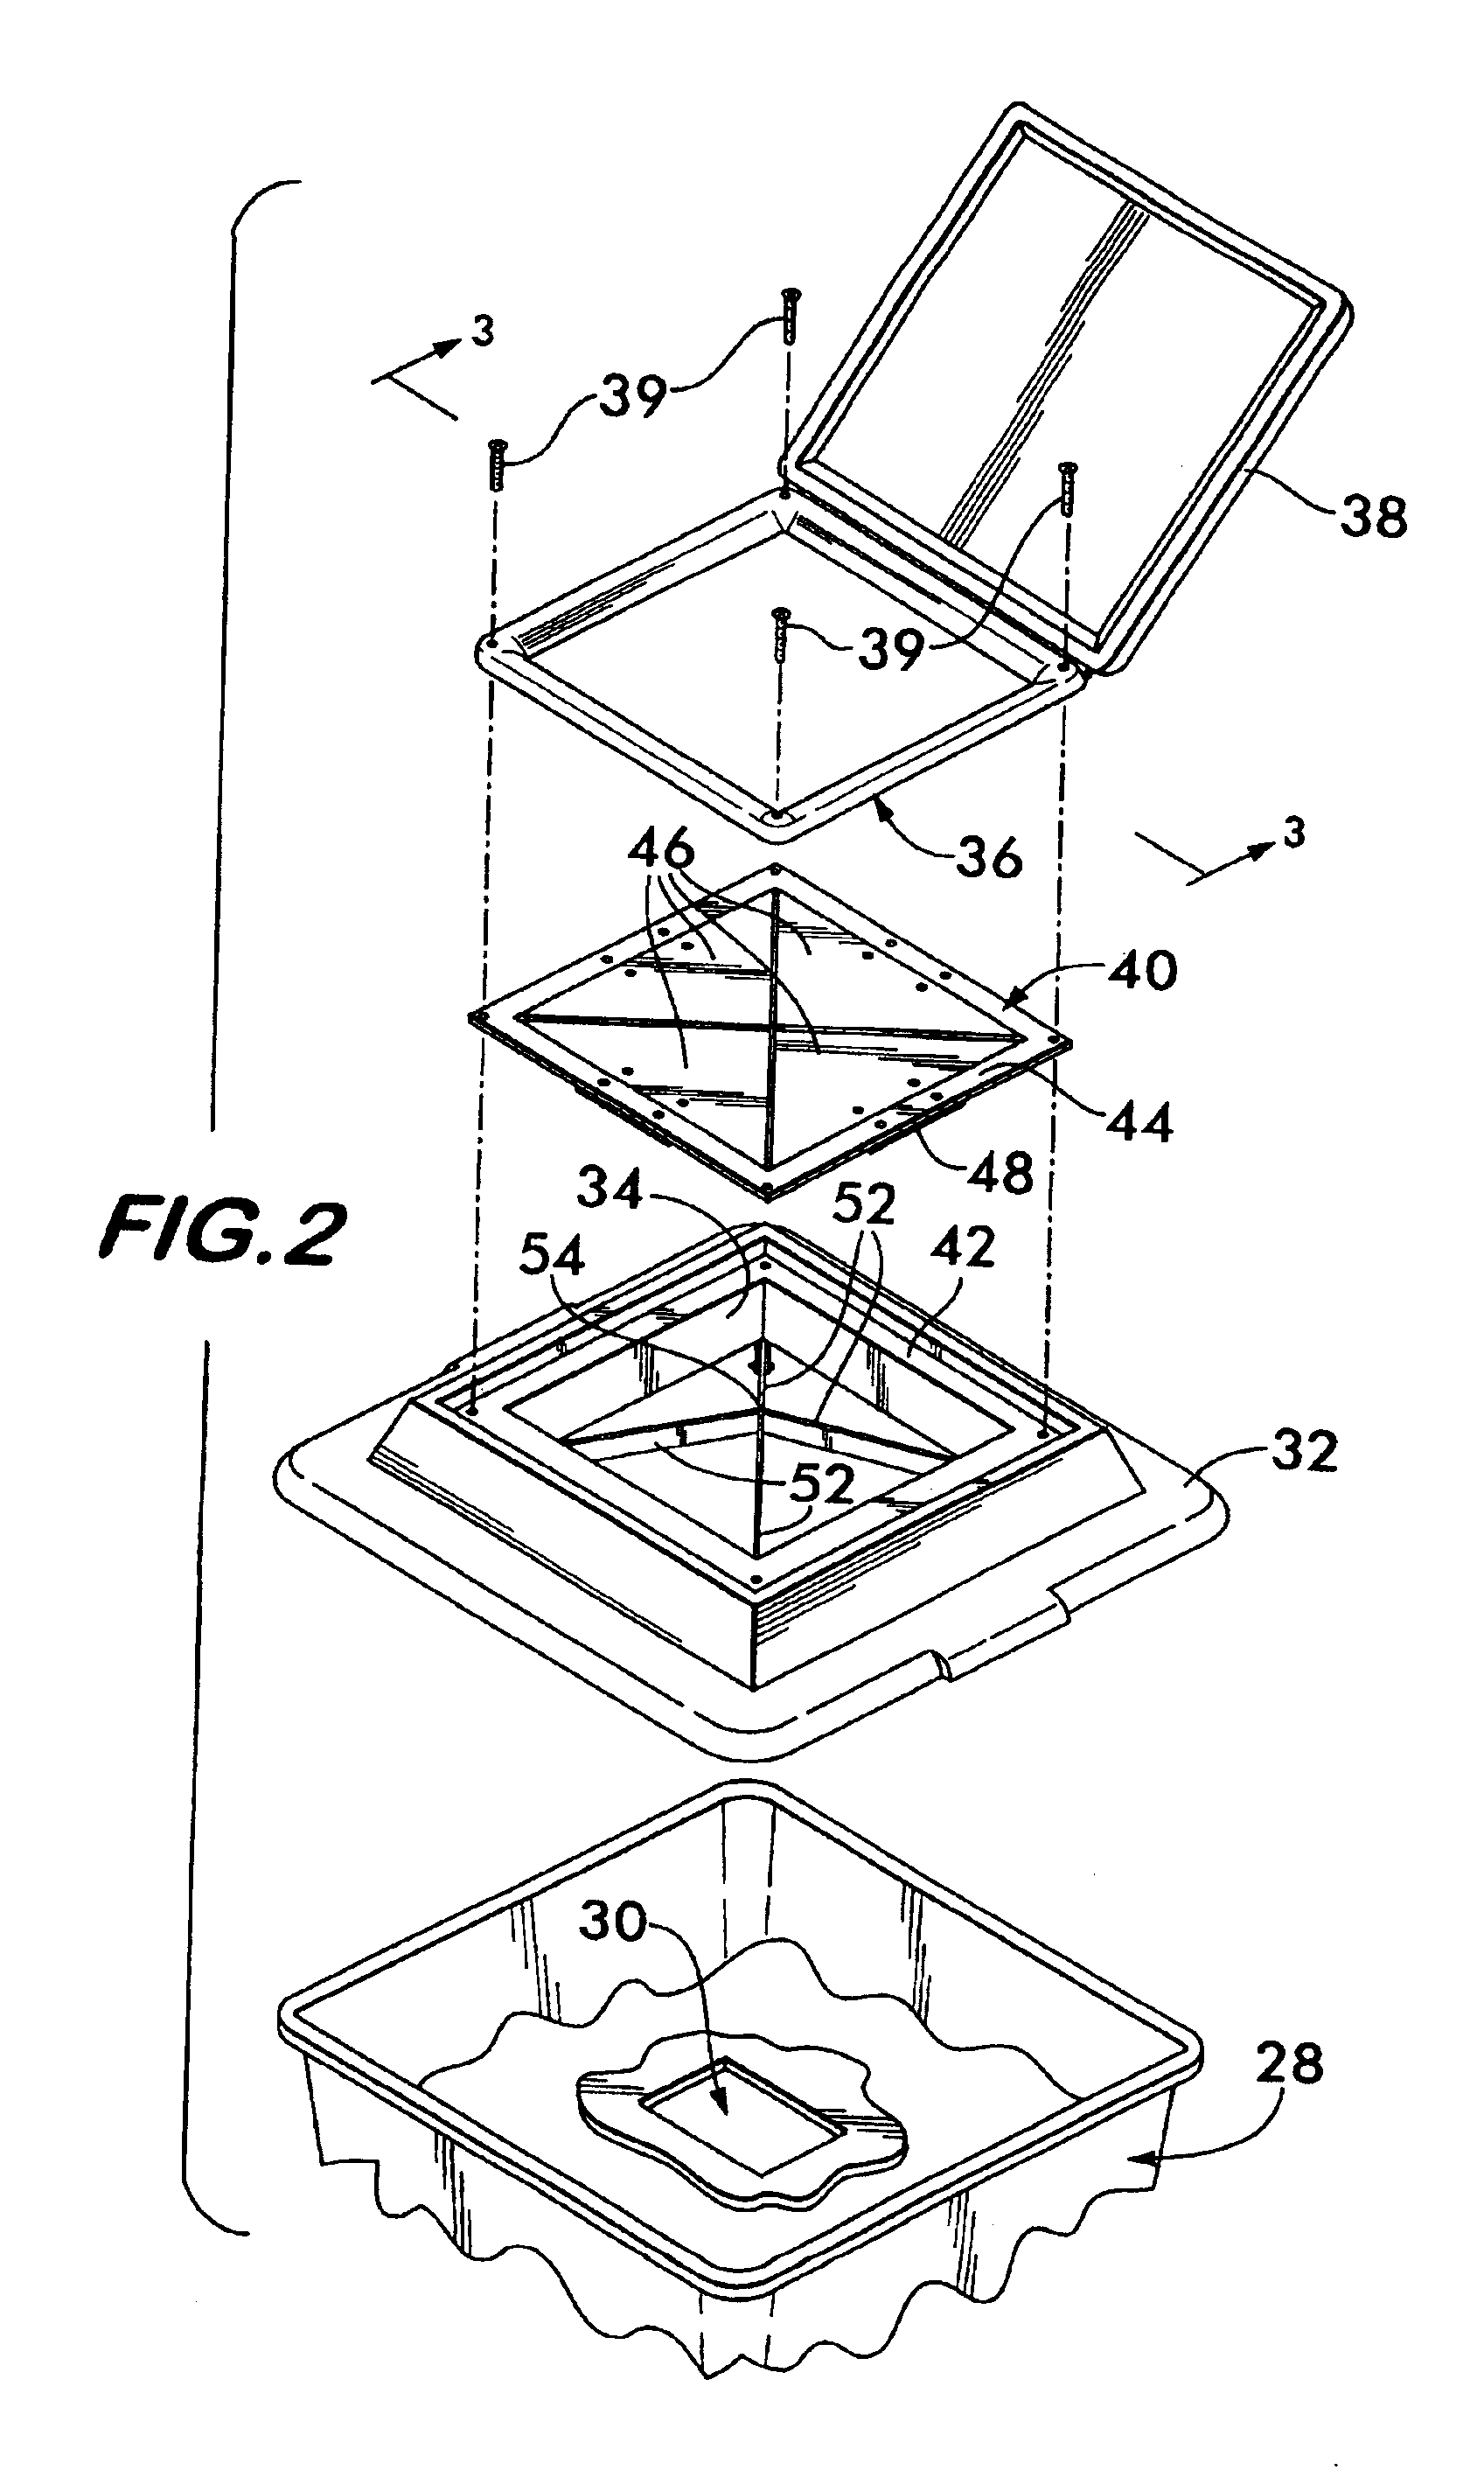 Packages for dispensing flowable materials and dispensing systems using such packages